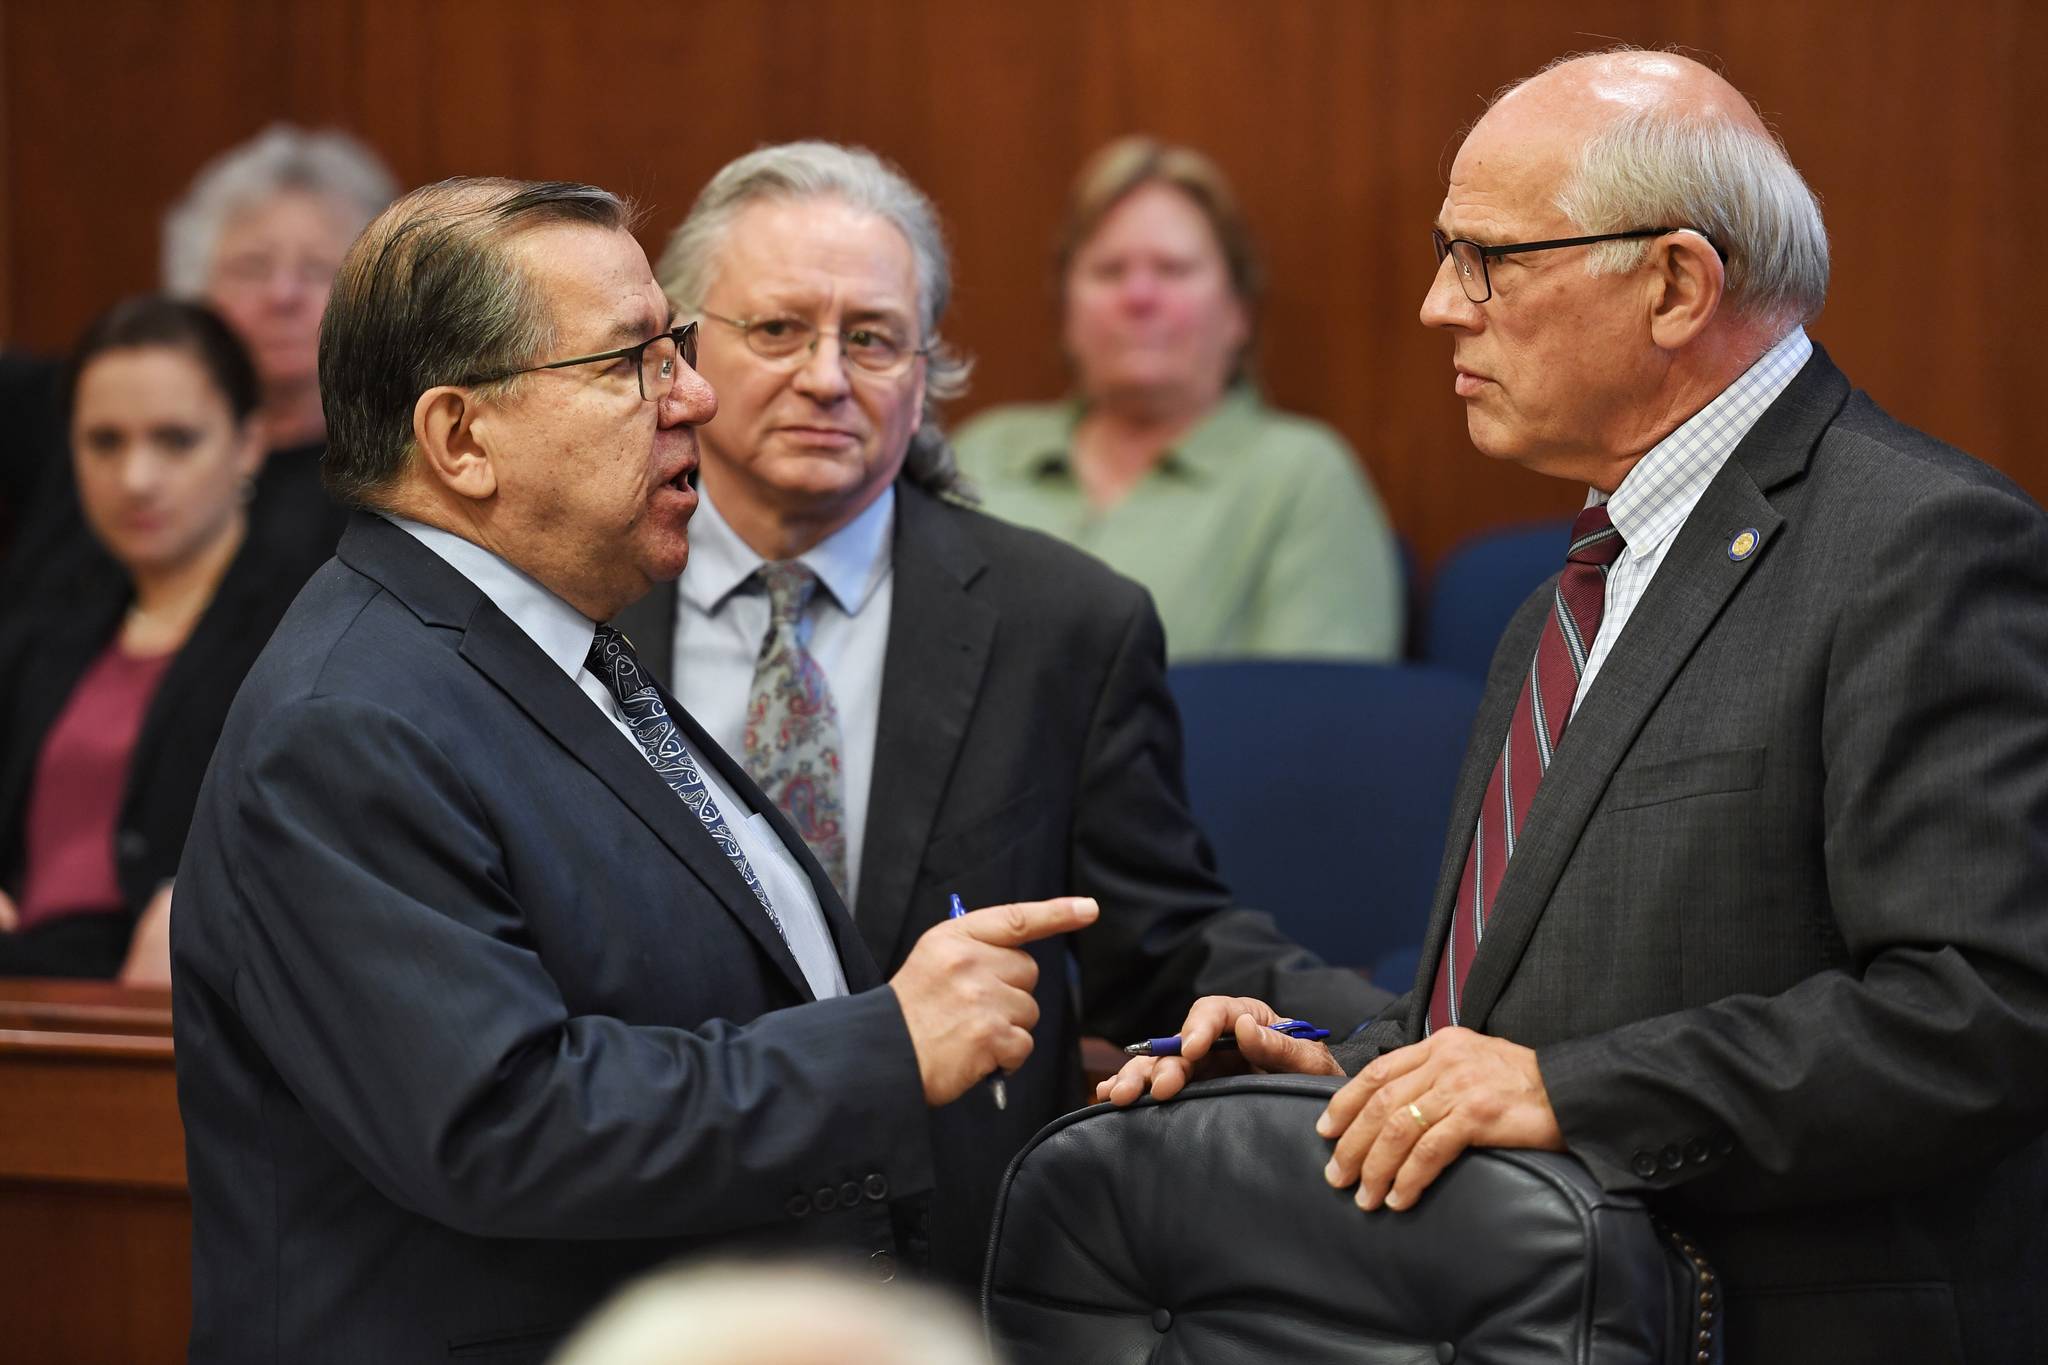 Sen. Lyman Hoffman, D-Bethel, left, expresses his displeasure with Sen. John Coghill, R-North Pole, right, as Sen. Tom Begich listens, during debate on the capital budget in the Senate at the Capitol on Thursday, June 13, 2019. (Michael Penn | Juneau Empire)